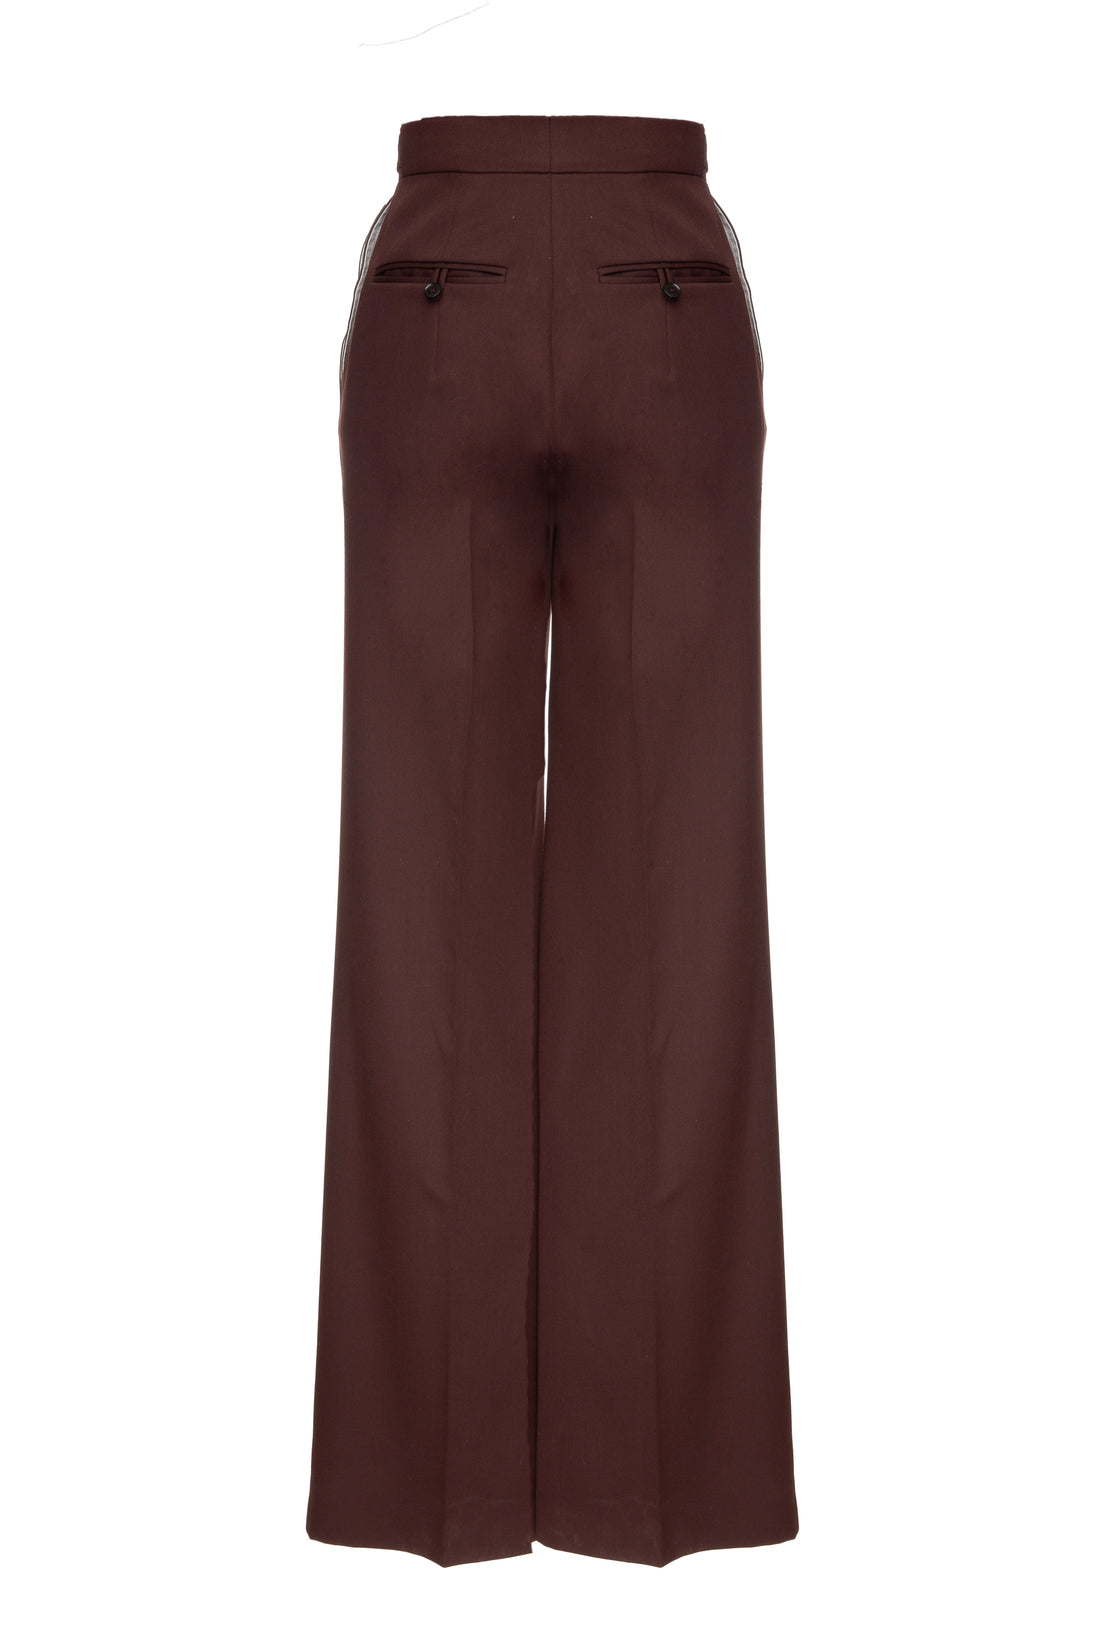 SITUATIONIST Burgundy Trouser